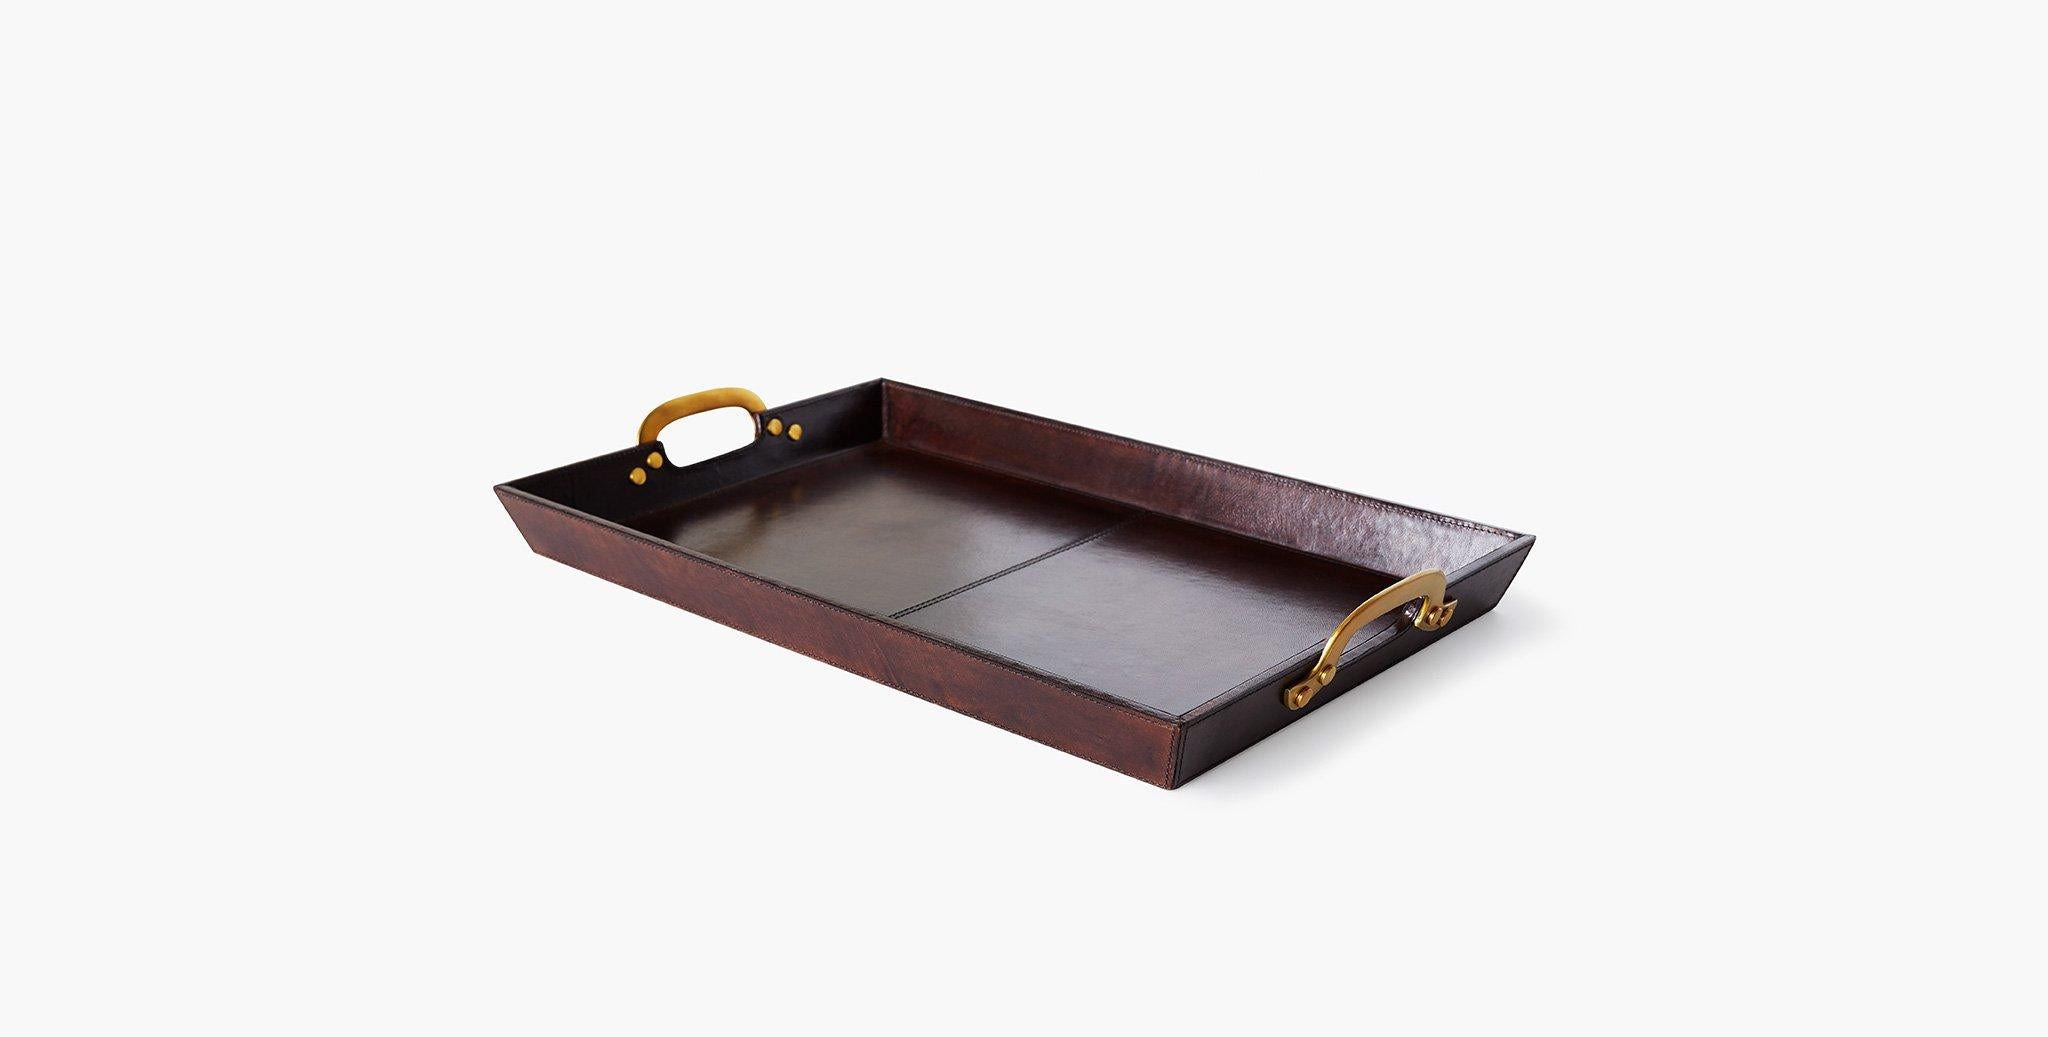 Our cade leather serving tray has riveted metal handles, providing contrast against its smooth leather frame, suitable for elevating a nightstand, counter, or coffee table display. Our handcrafted fabrics, leathers, and finishes are inspired by the